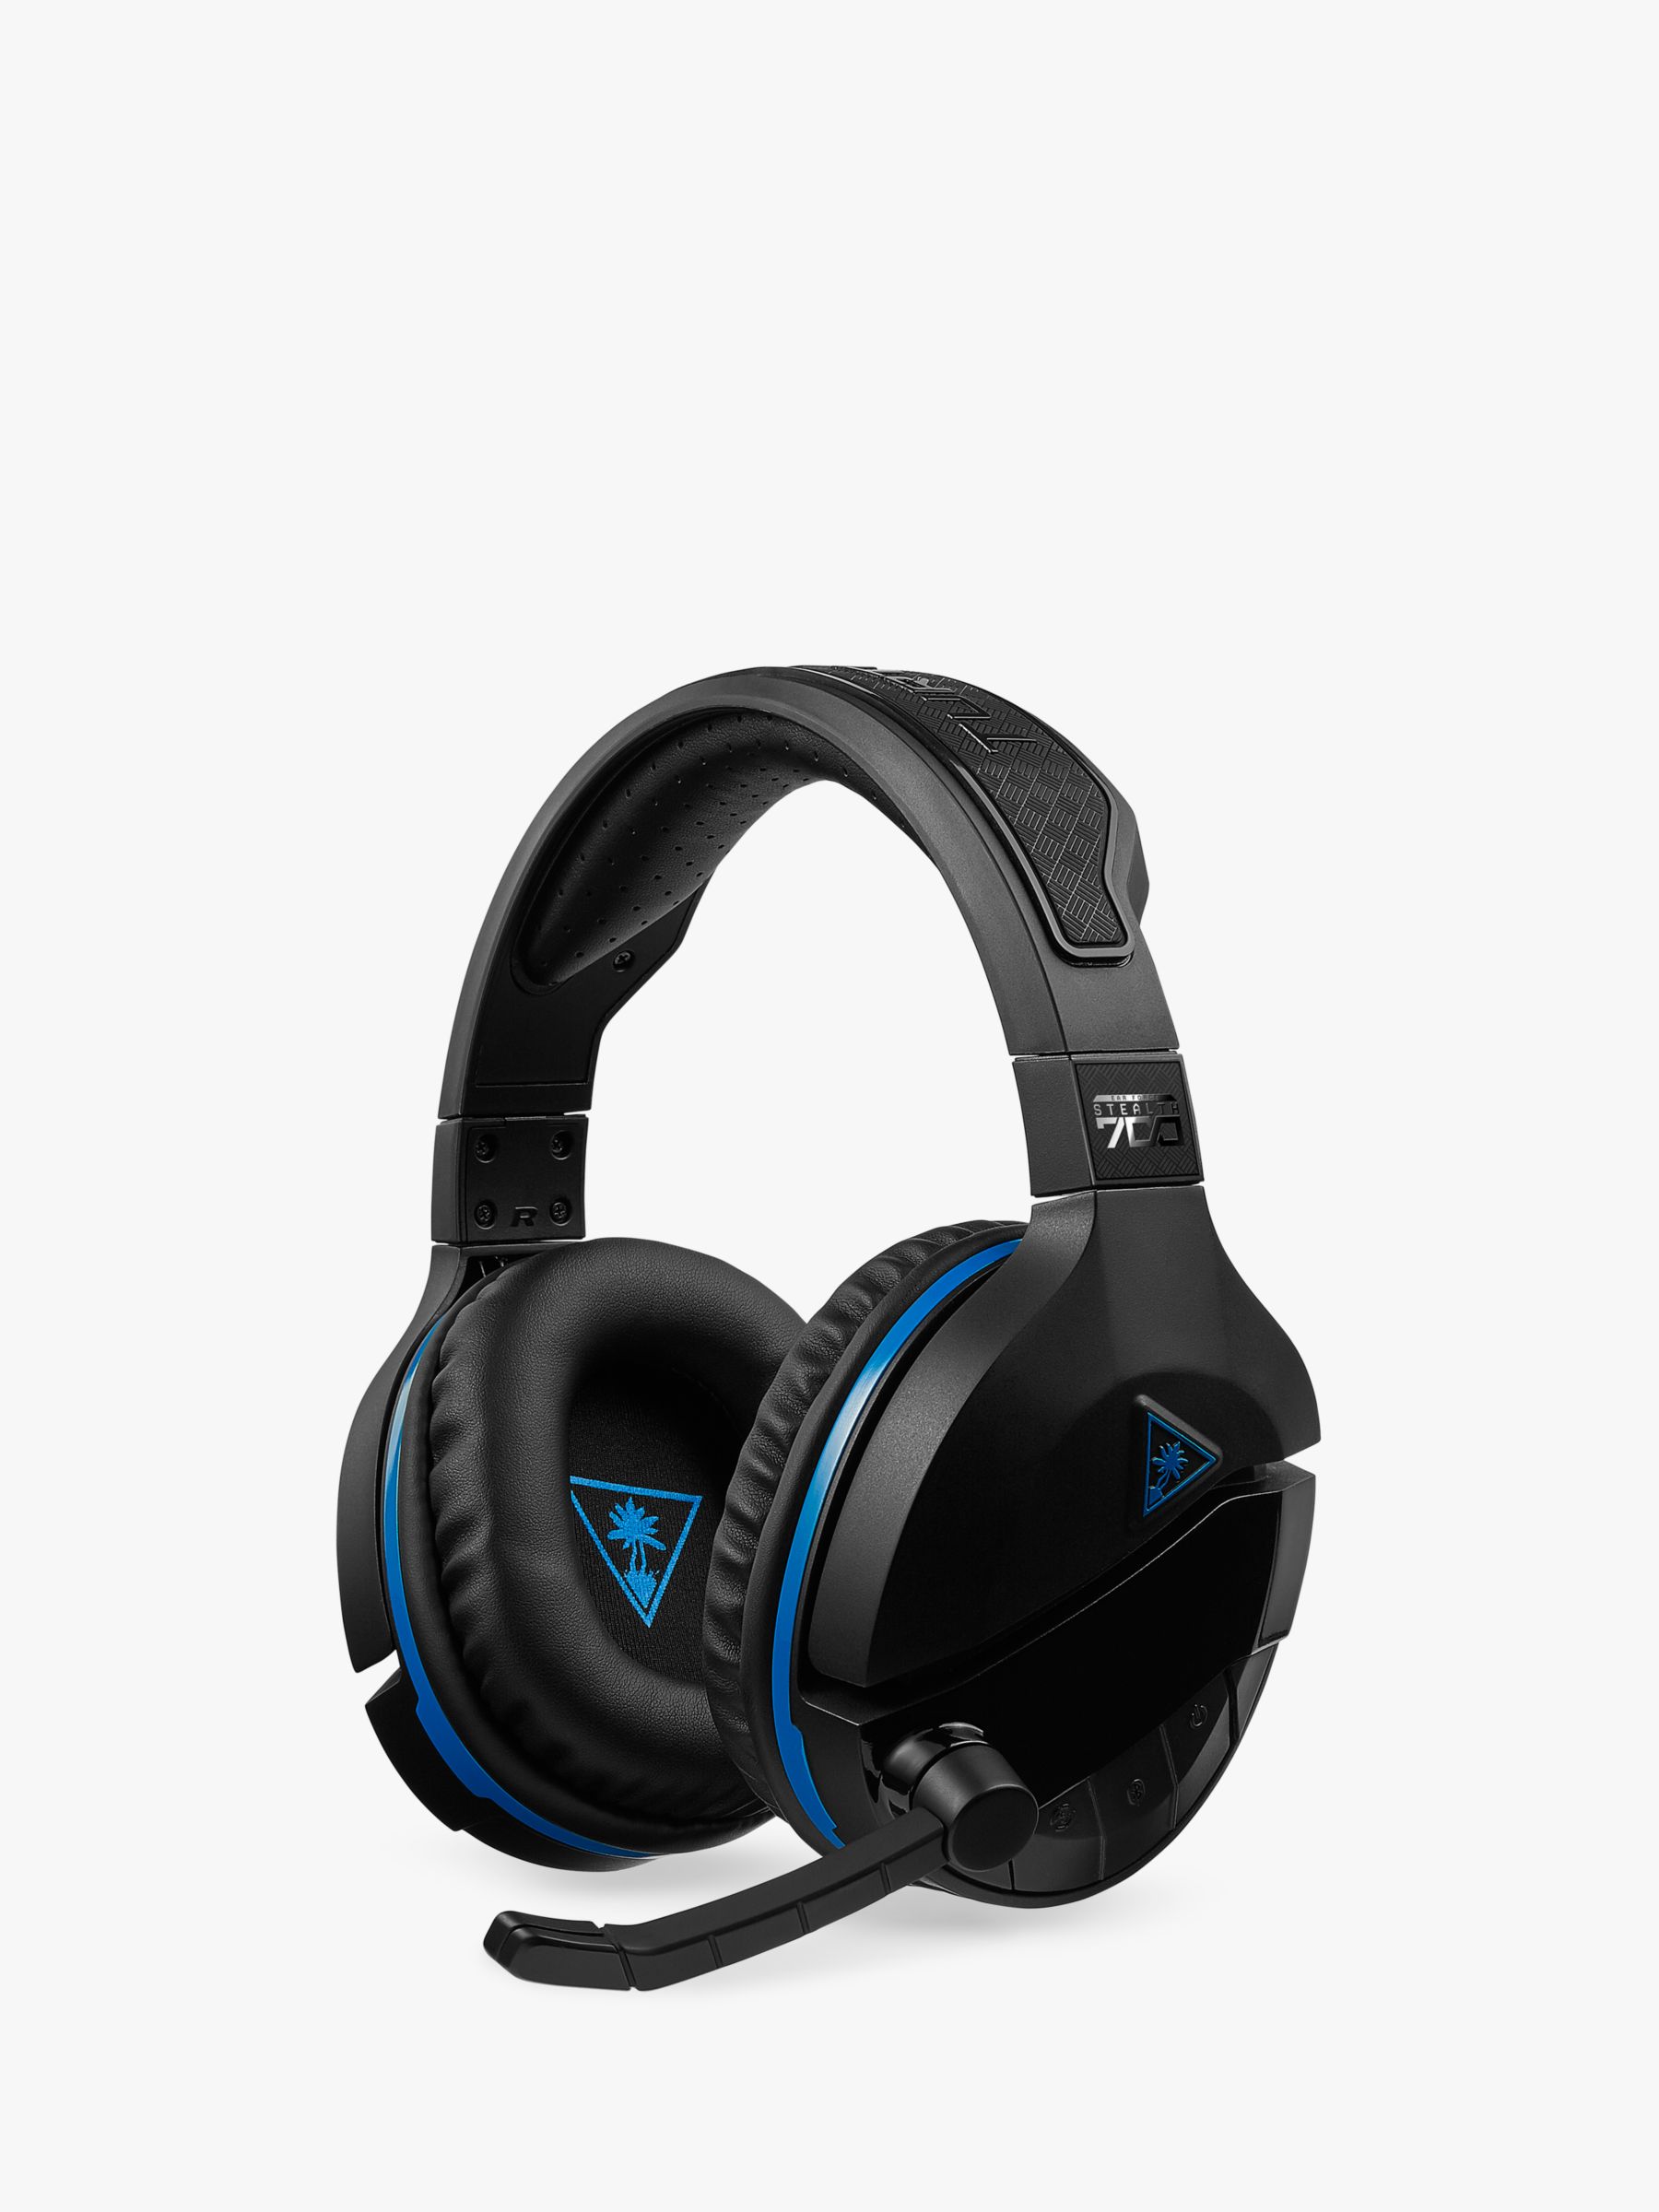 Turtle Beach Ear Force Stealth 700 Bluetooth Wireless 7.1, DTS, Surround Gaming Headset, Black